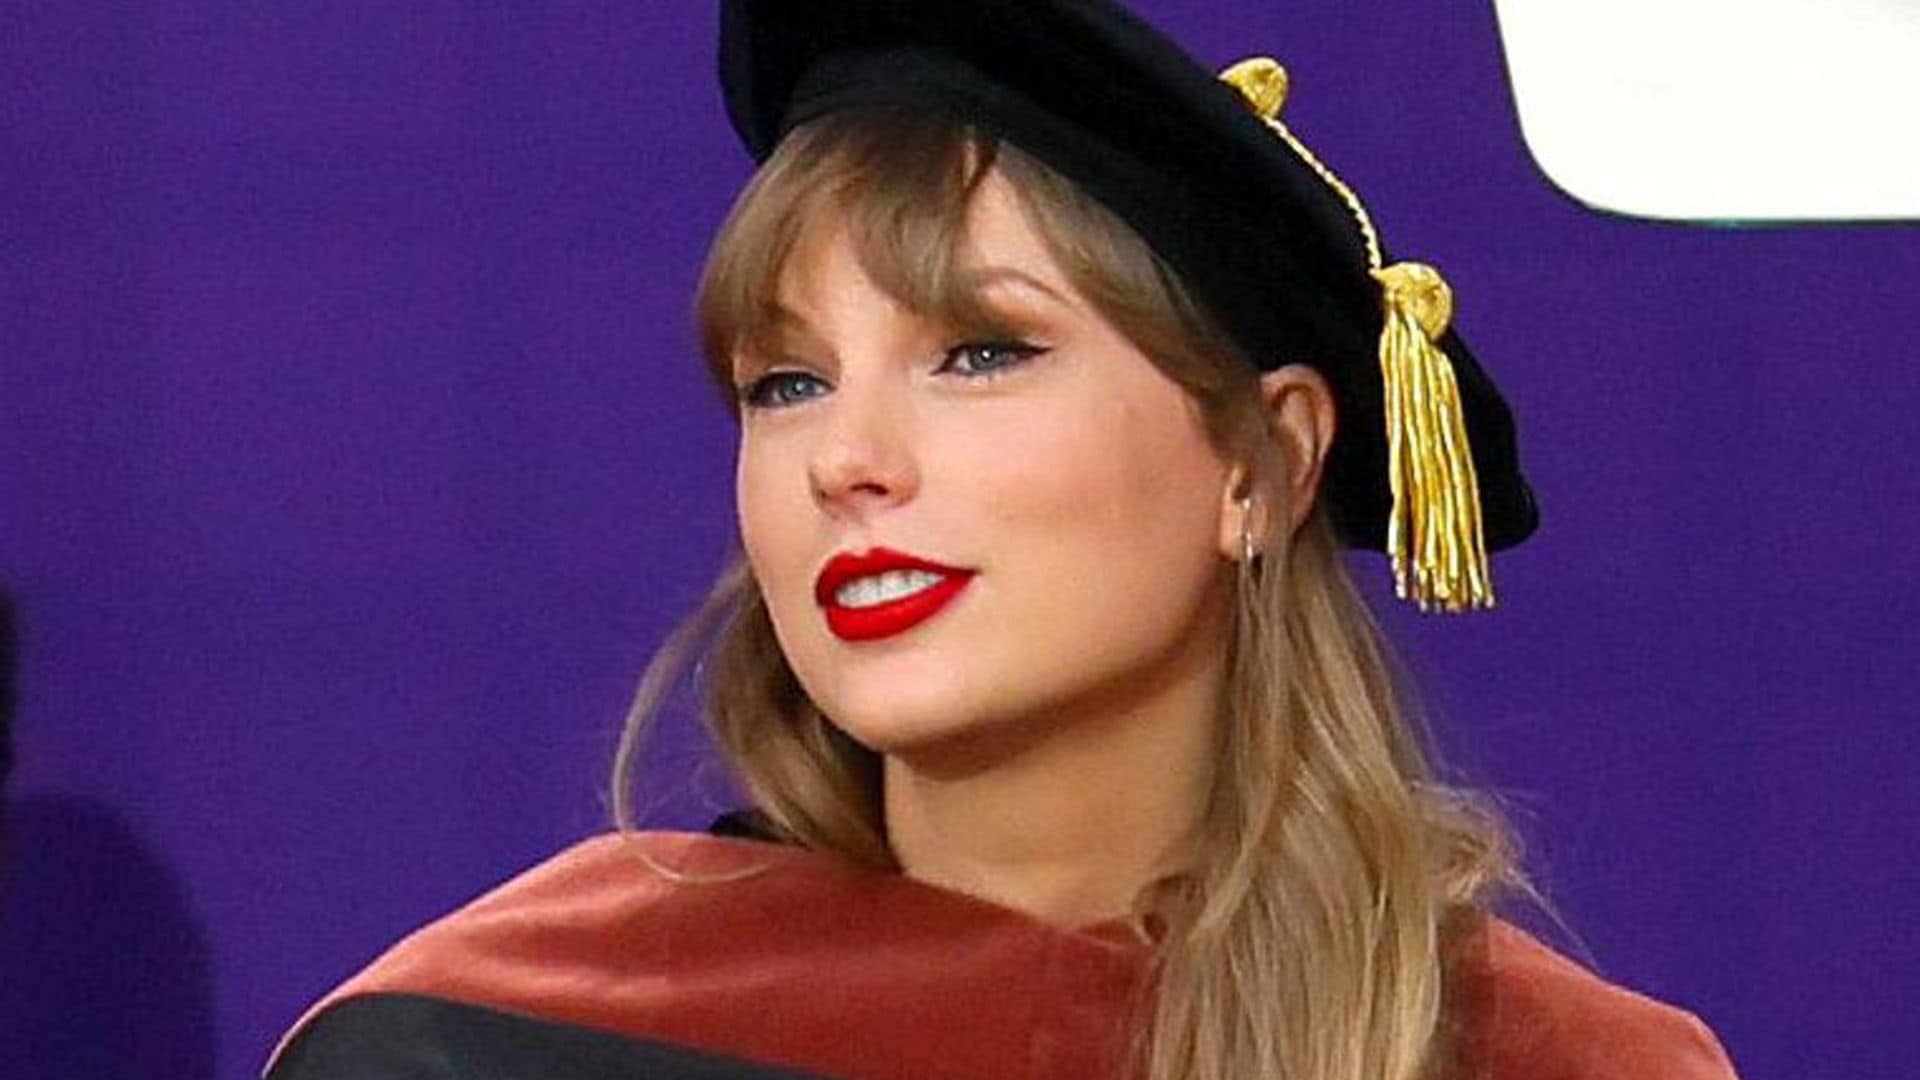 How Taylor Swift is inspiring students at the University of Texas with her songwriting